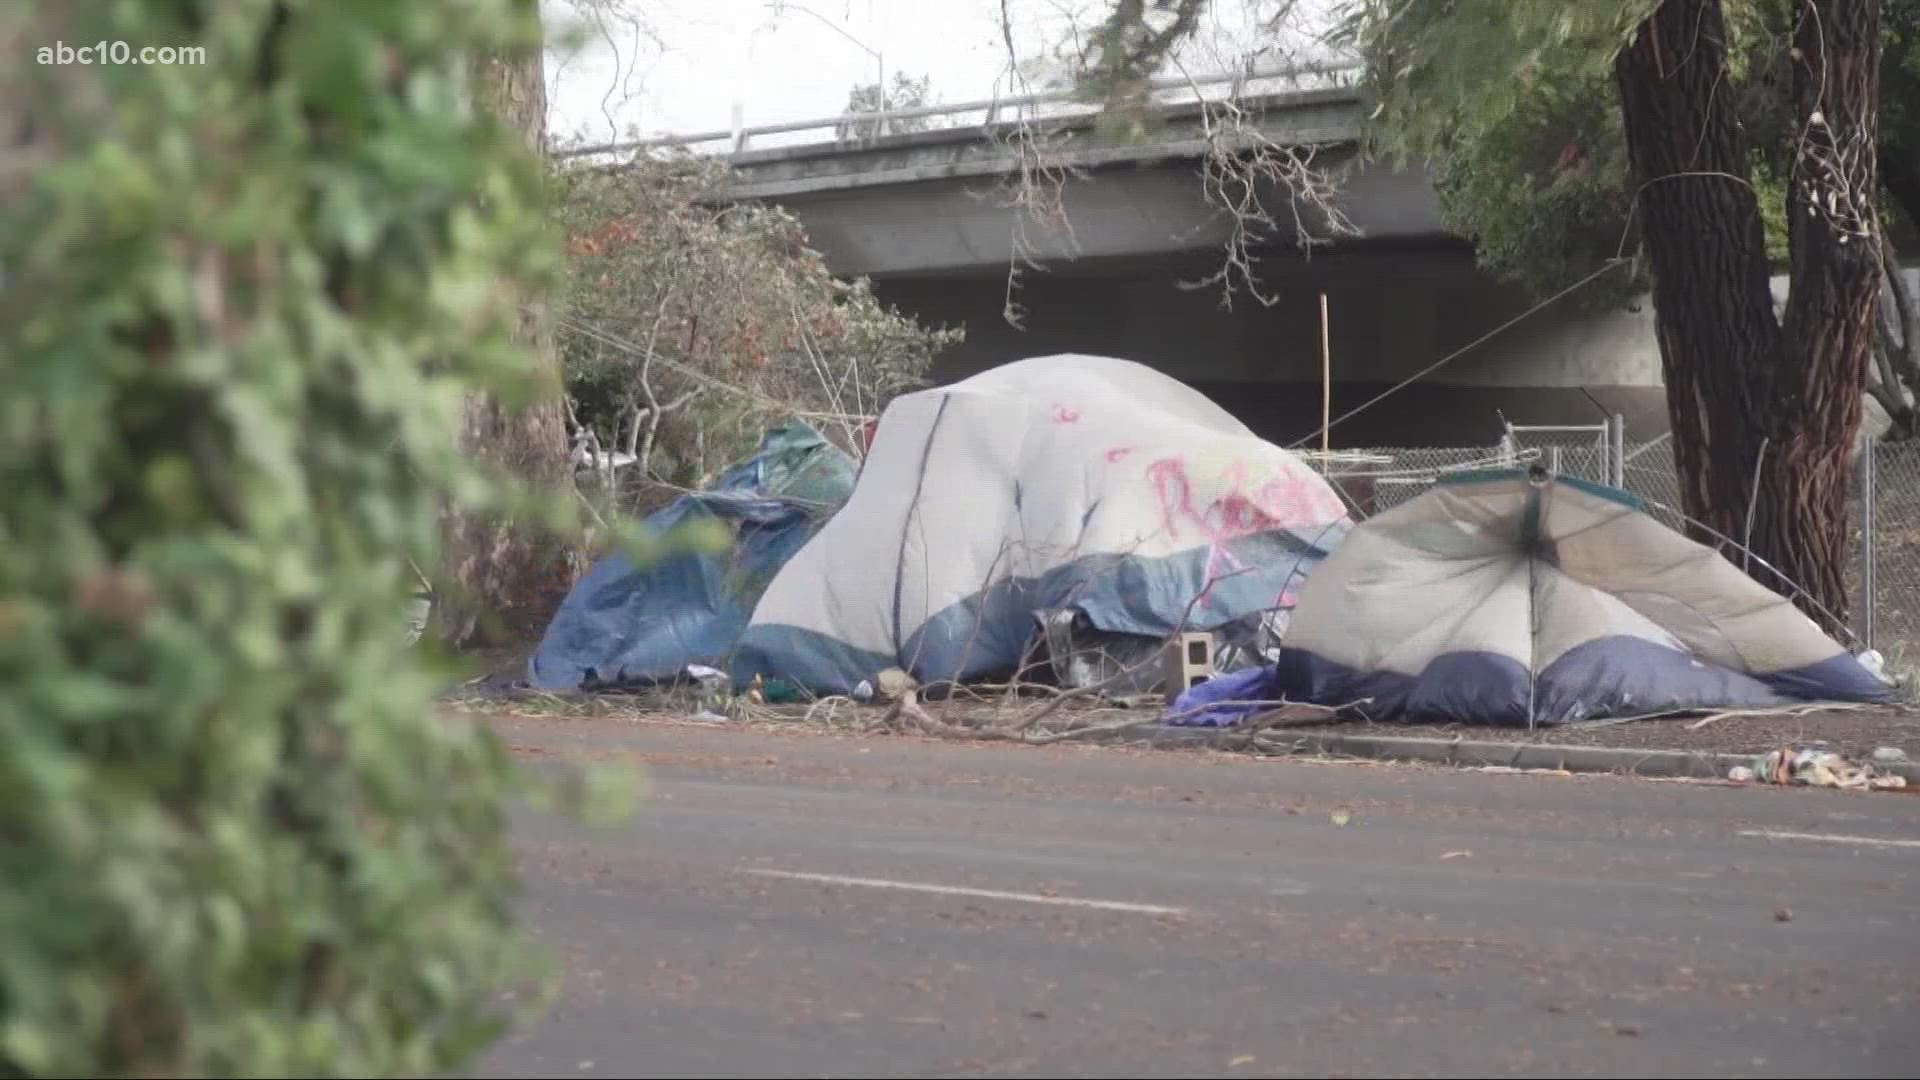 Those without shelter are most at risk during storms. To assist, the City of Sacramento is activating two storm shelters to open this weekend into Monday.